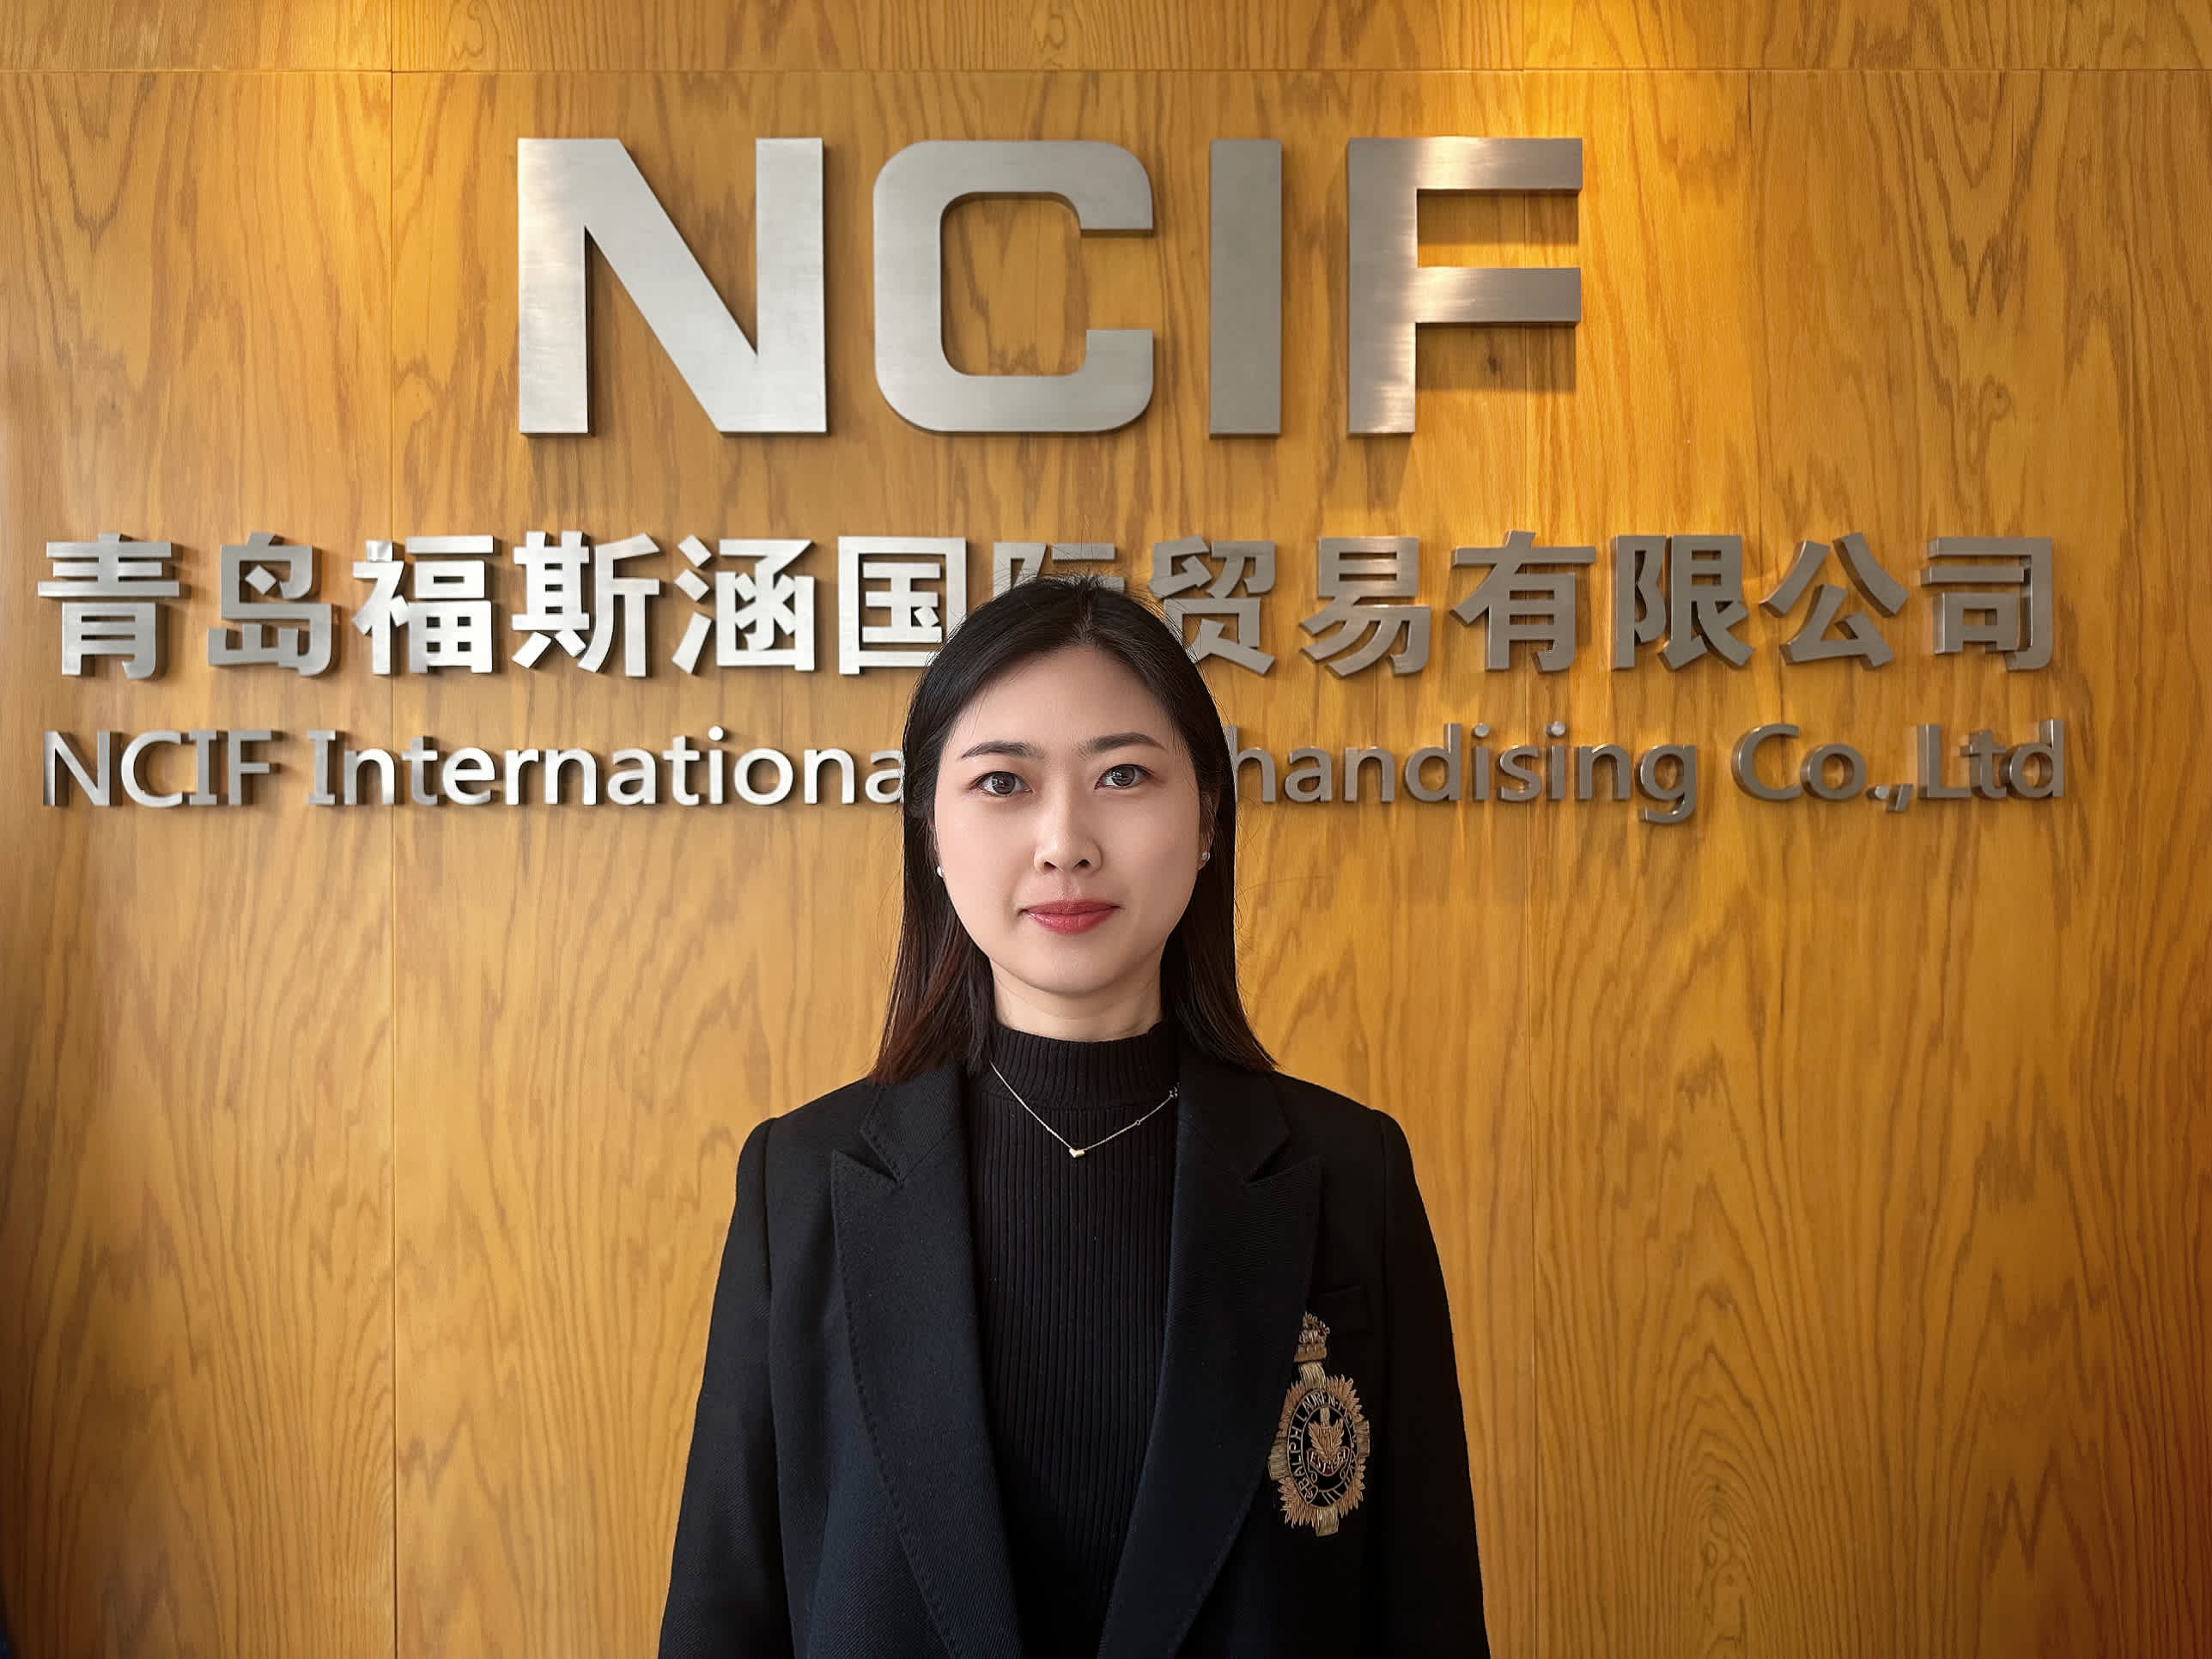 NCIF International Merchandising Co., Ltd overcame their challenges by finding a logistics partner who offered them flexible logistics solutions. Find out more.